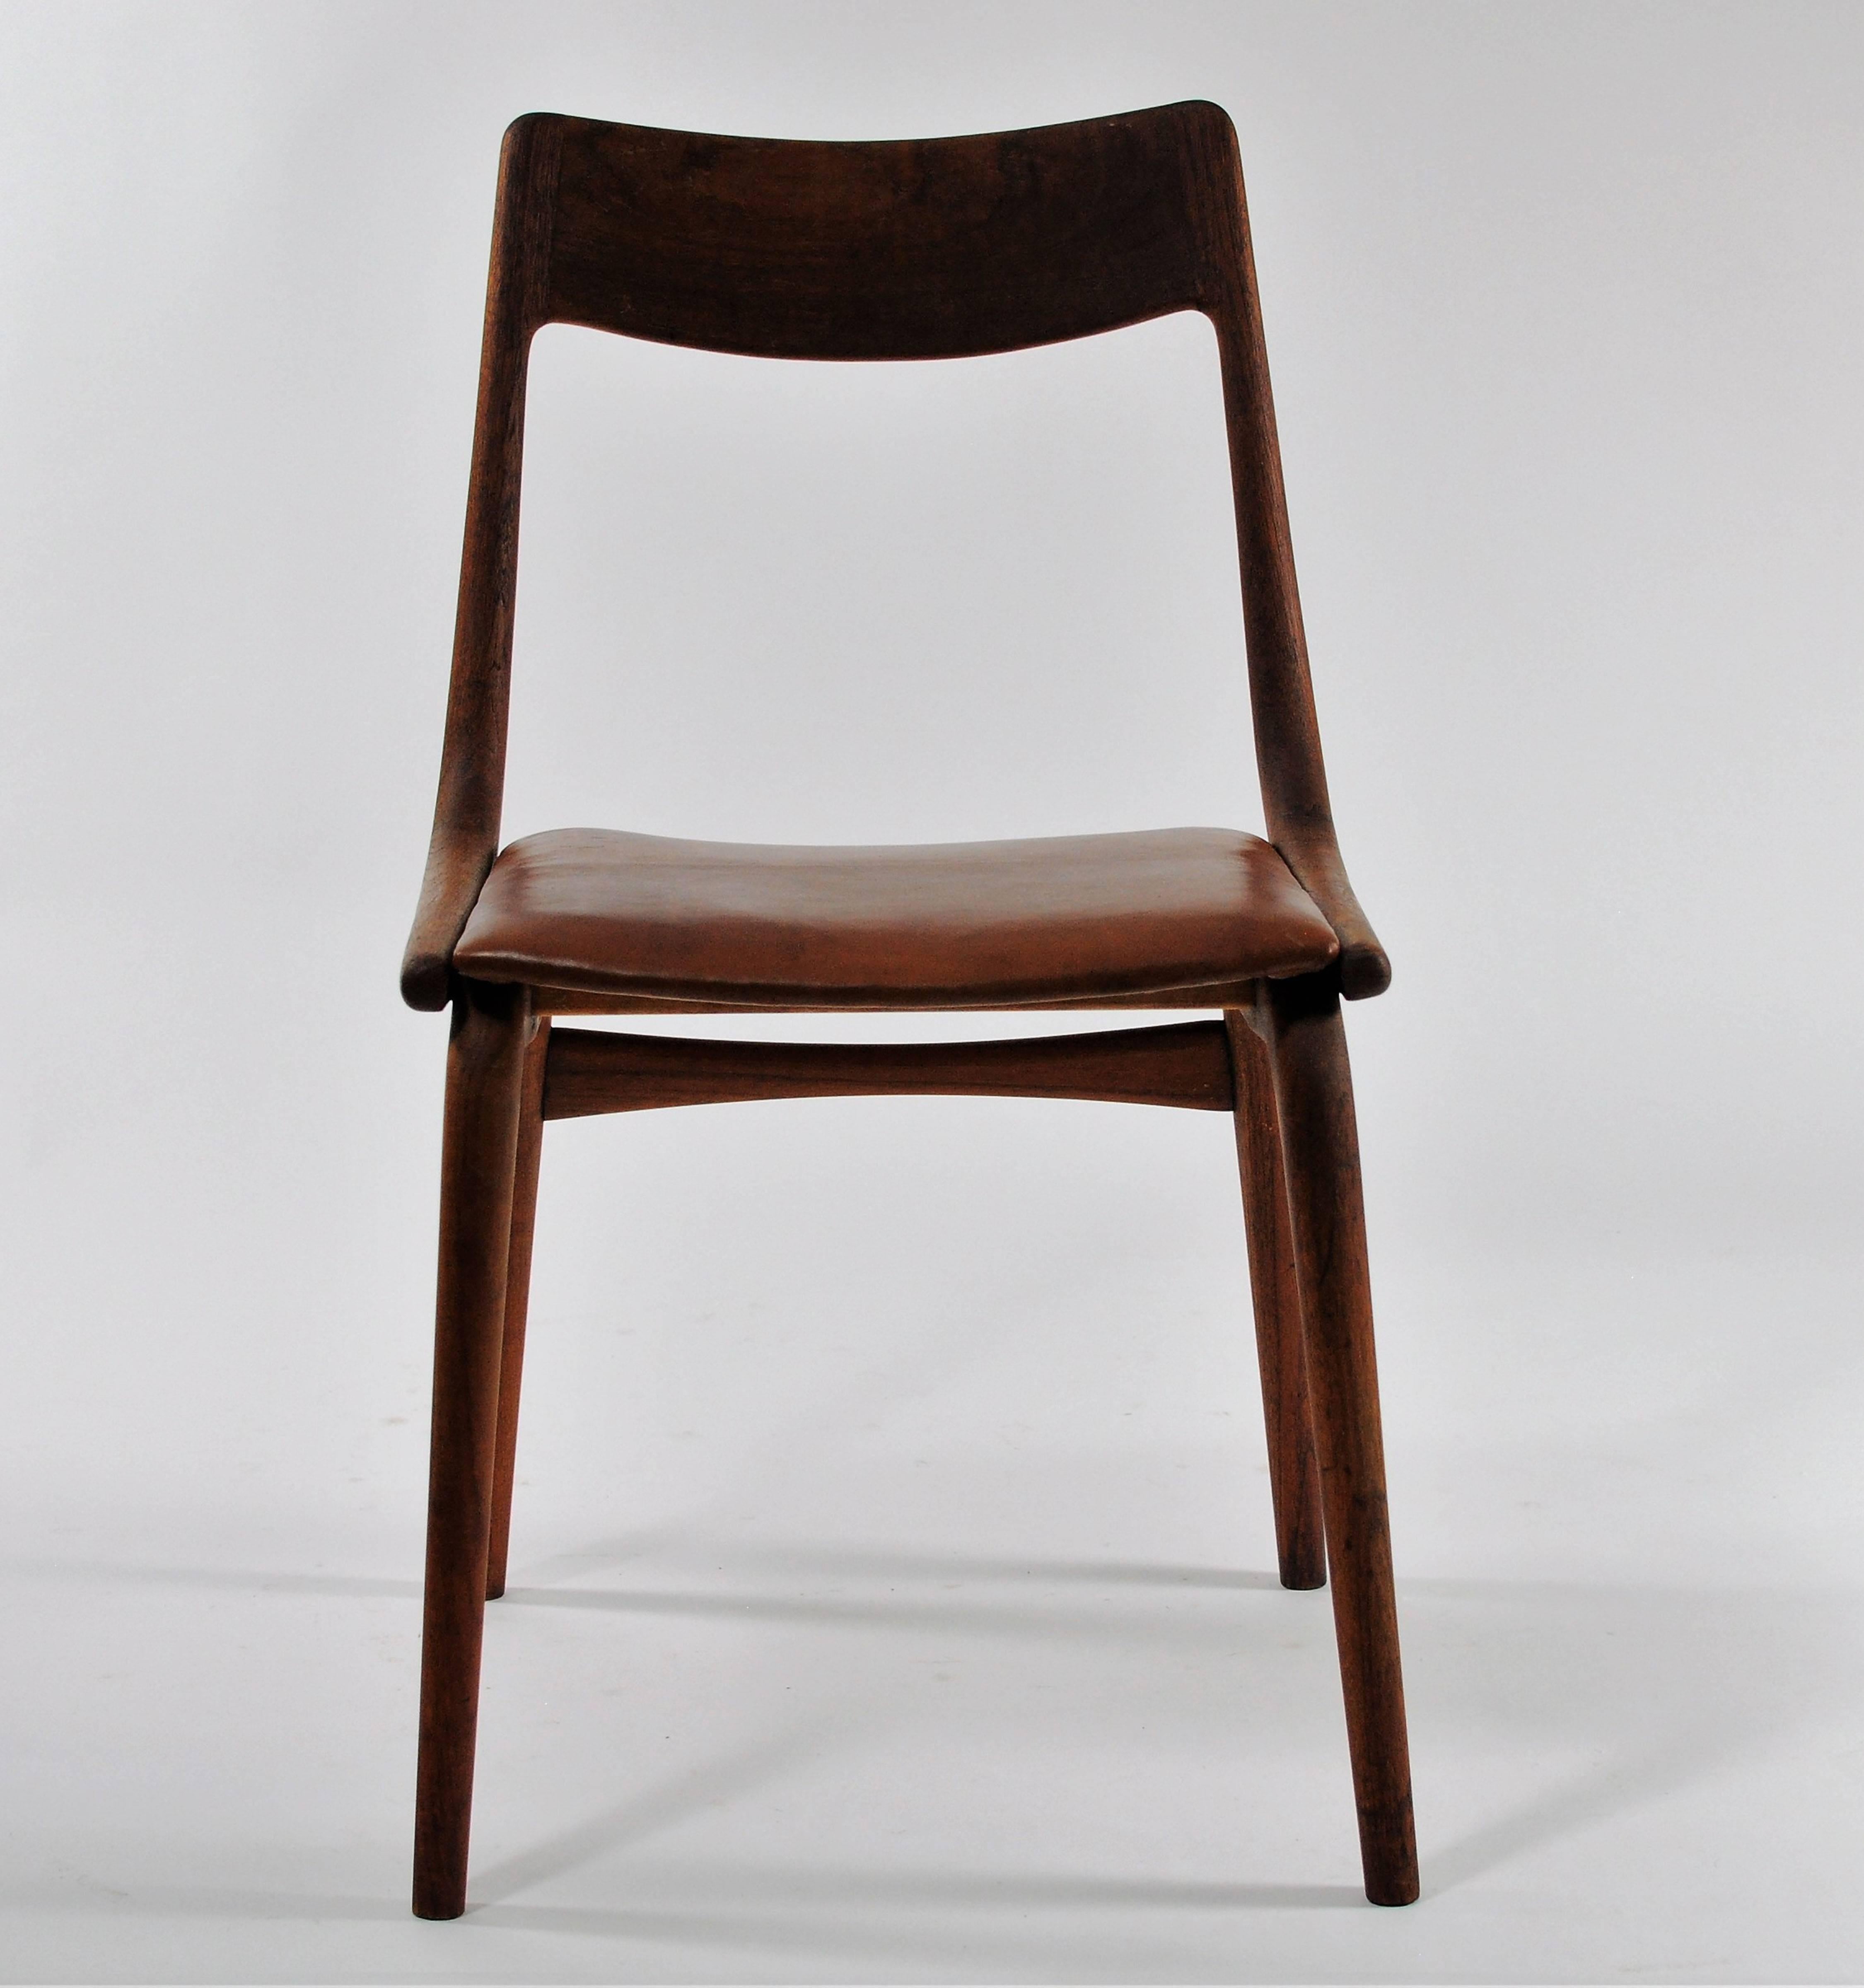 Set of four 1950s Danish boomerang dining chairs in teak by Alfred Christensen for Slagelse Møbelfabrik.

The comfortable chairs feature a simple but elegant boomerang shaped frame in solid bended teak with a well shaped teak backrest and a very